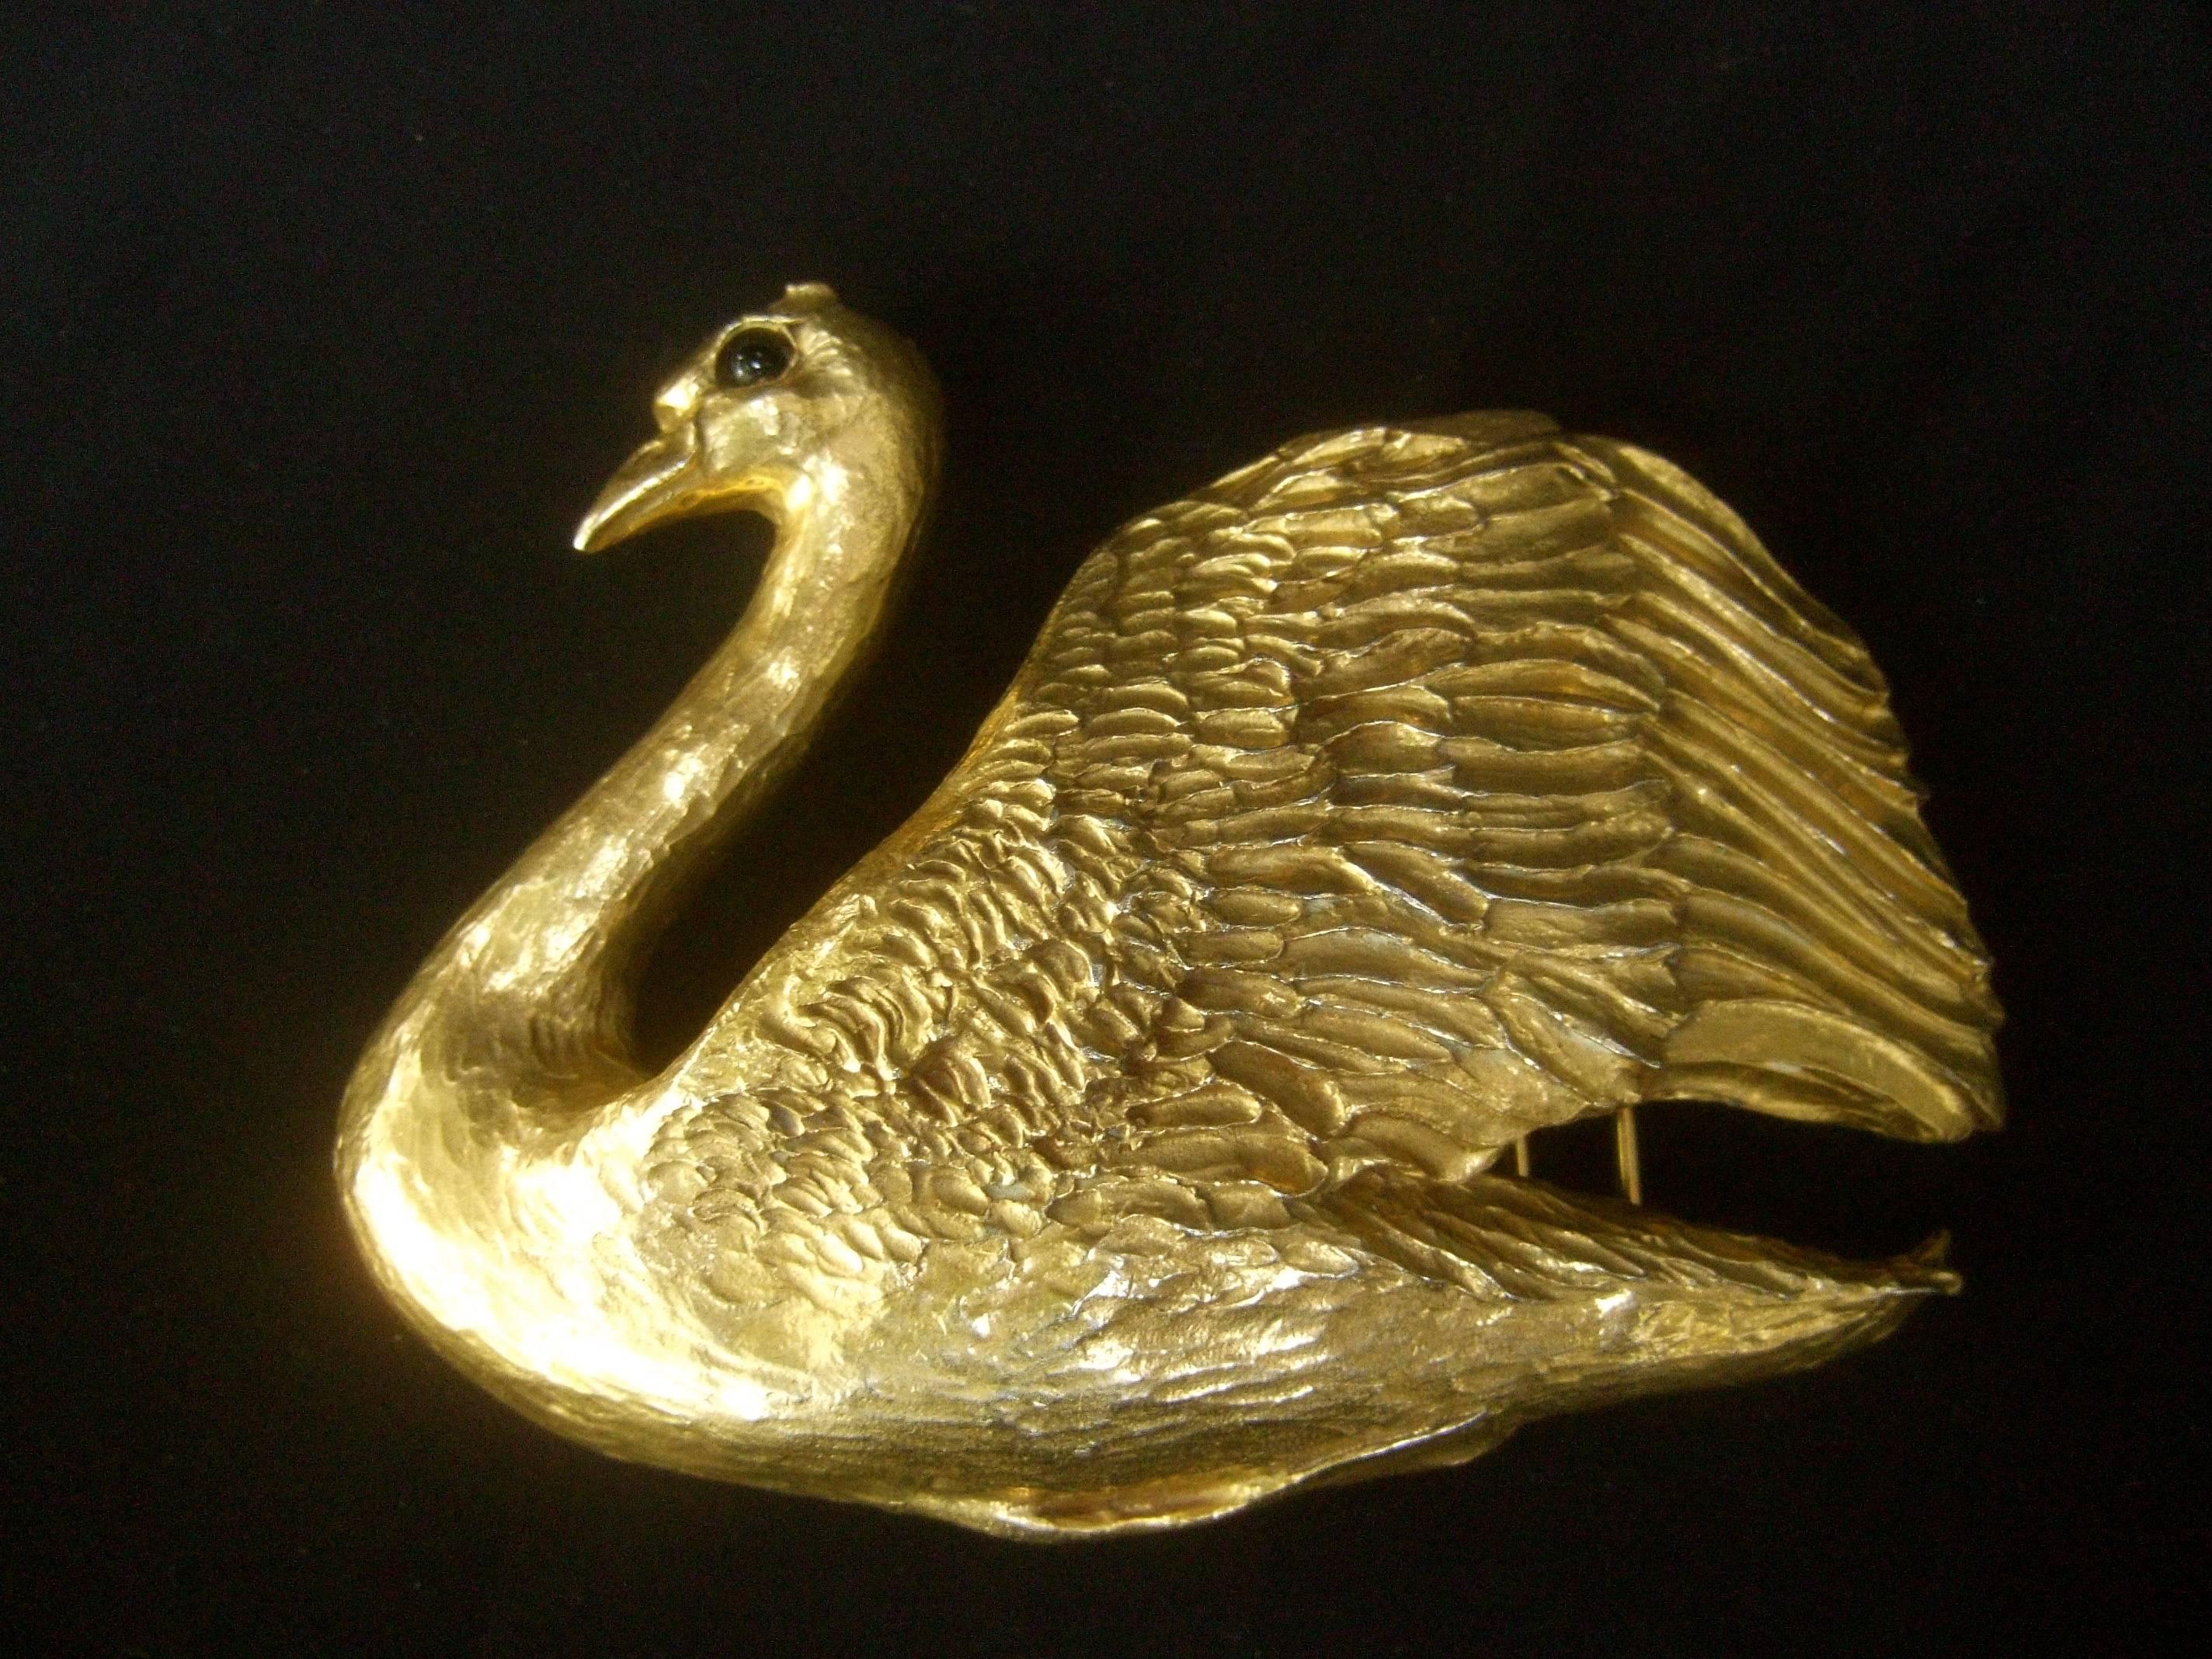 Christopher Ross Massive gilt metal swan belt buckle c 1983
The incredible belt buckle is designed with a huge
scale gilt metal swan. The luminous gilt metal plating
is 24k gold over base metal

The swan is embellished with a black glass cabochon